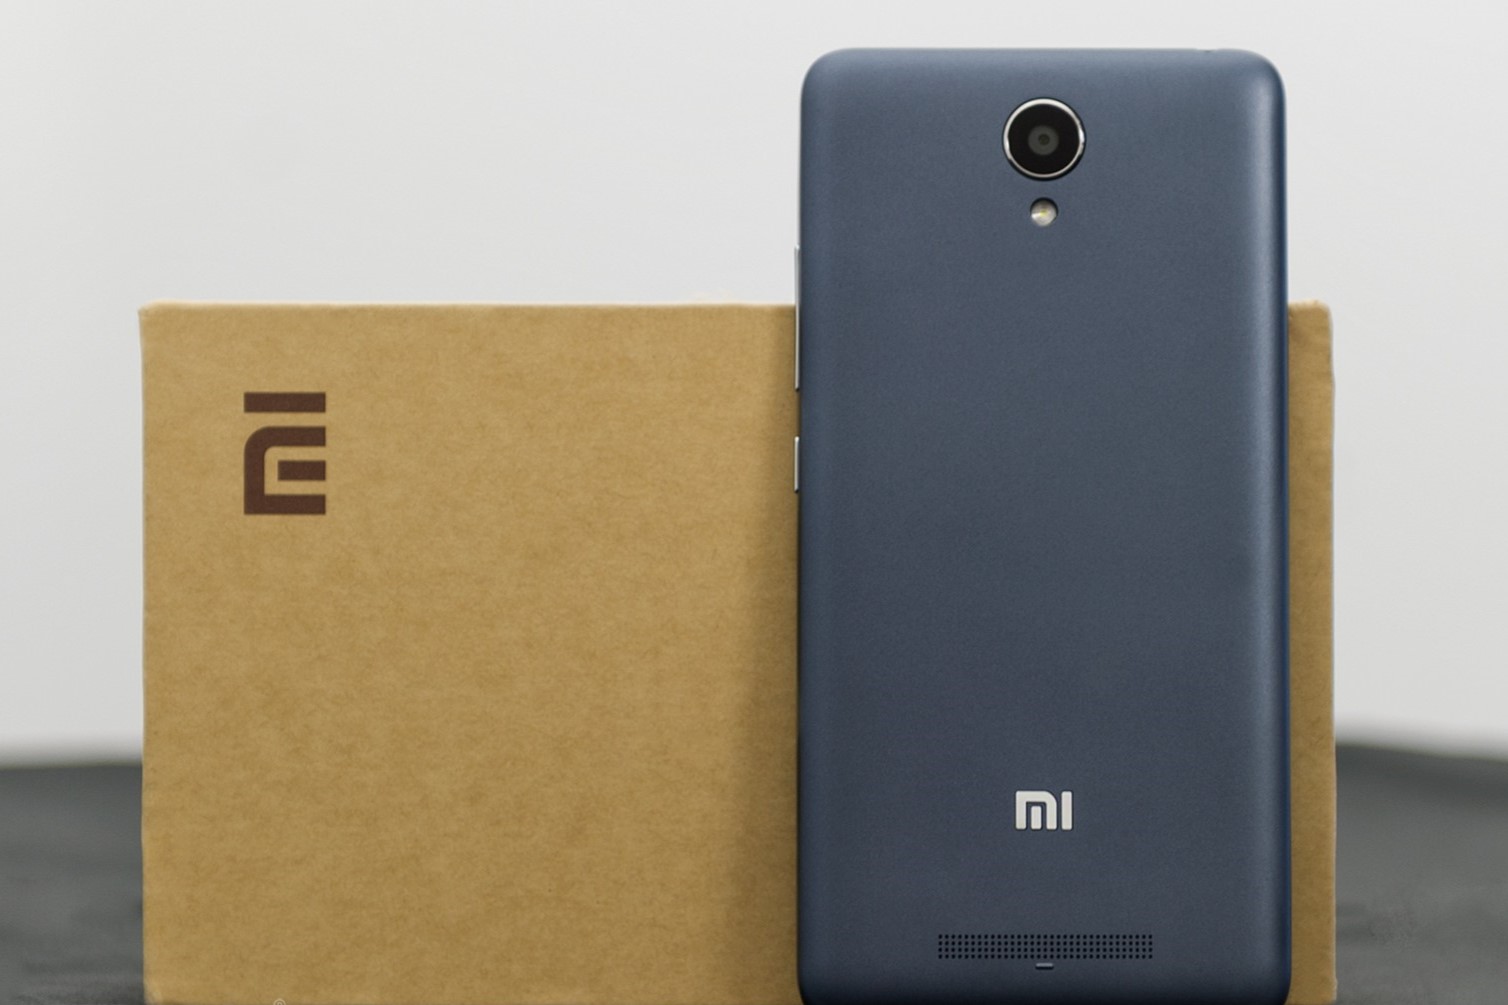 Services On Xiaomi Redmi Note 2: A Quick Overview